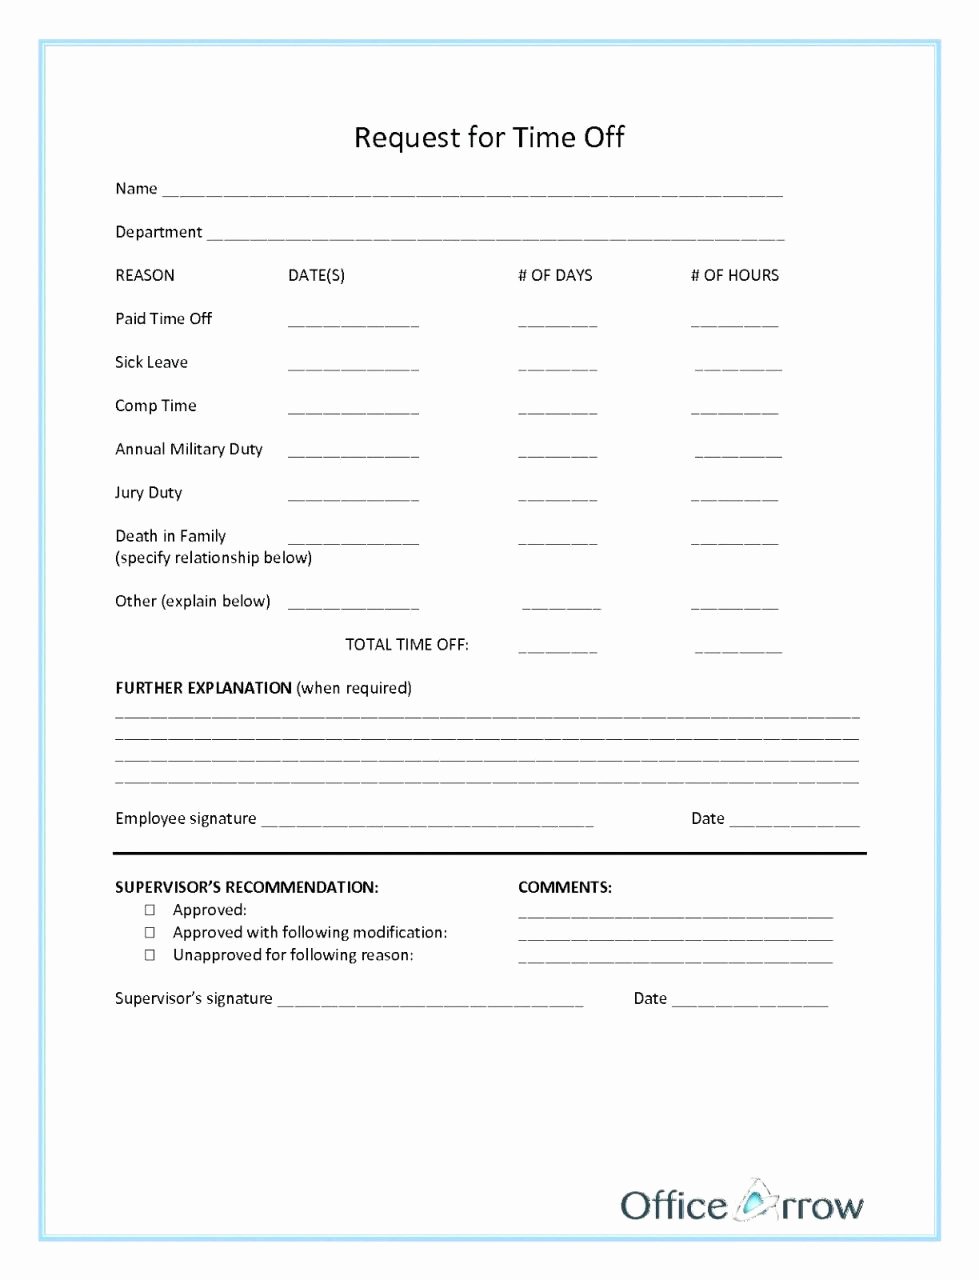 Request Time Off Template Awesome Paid Time F form